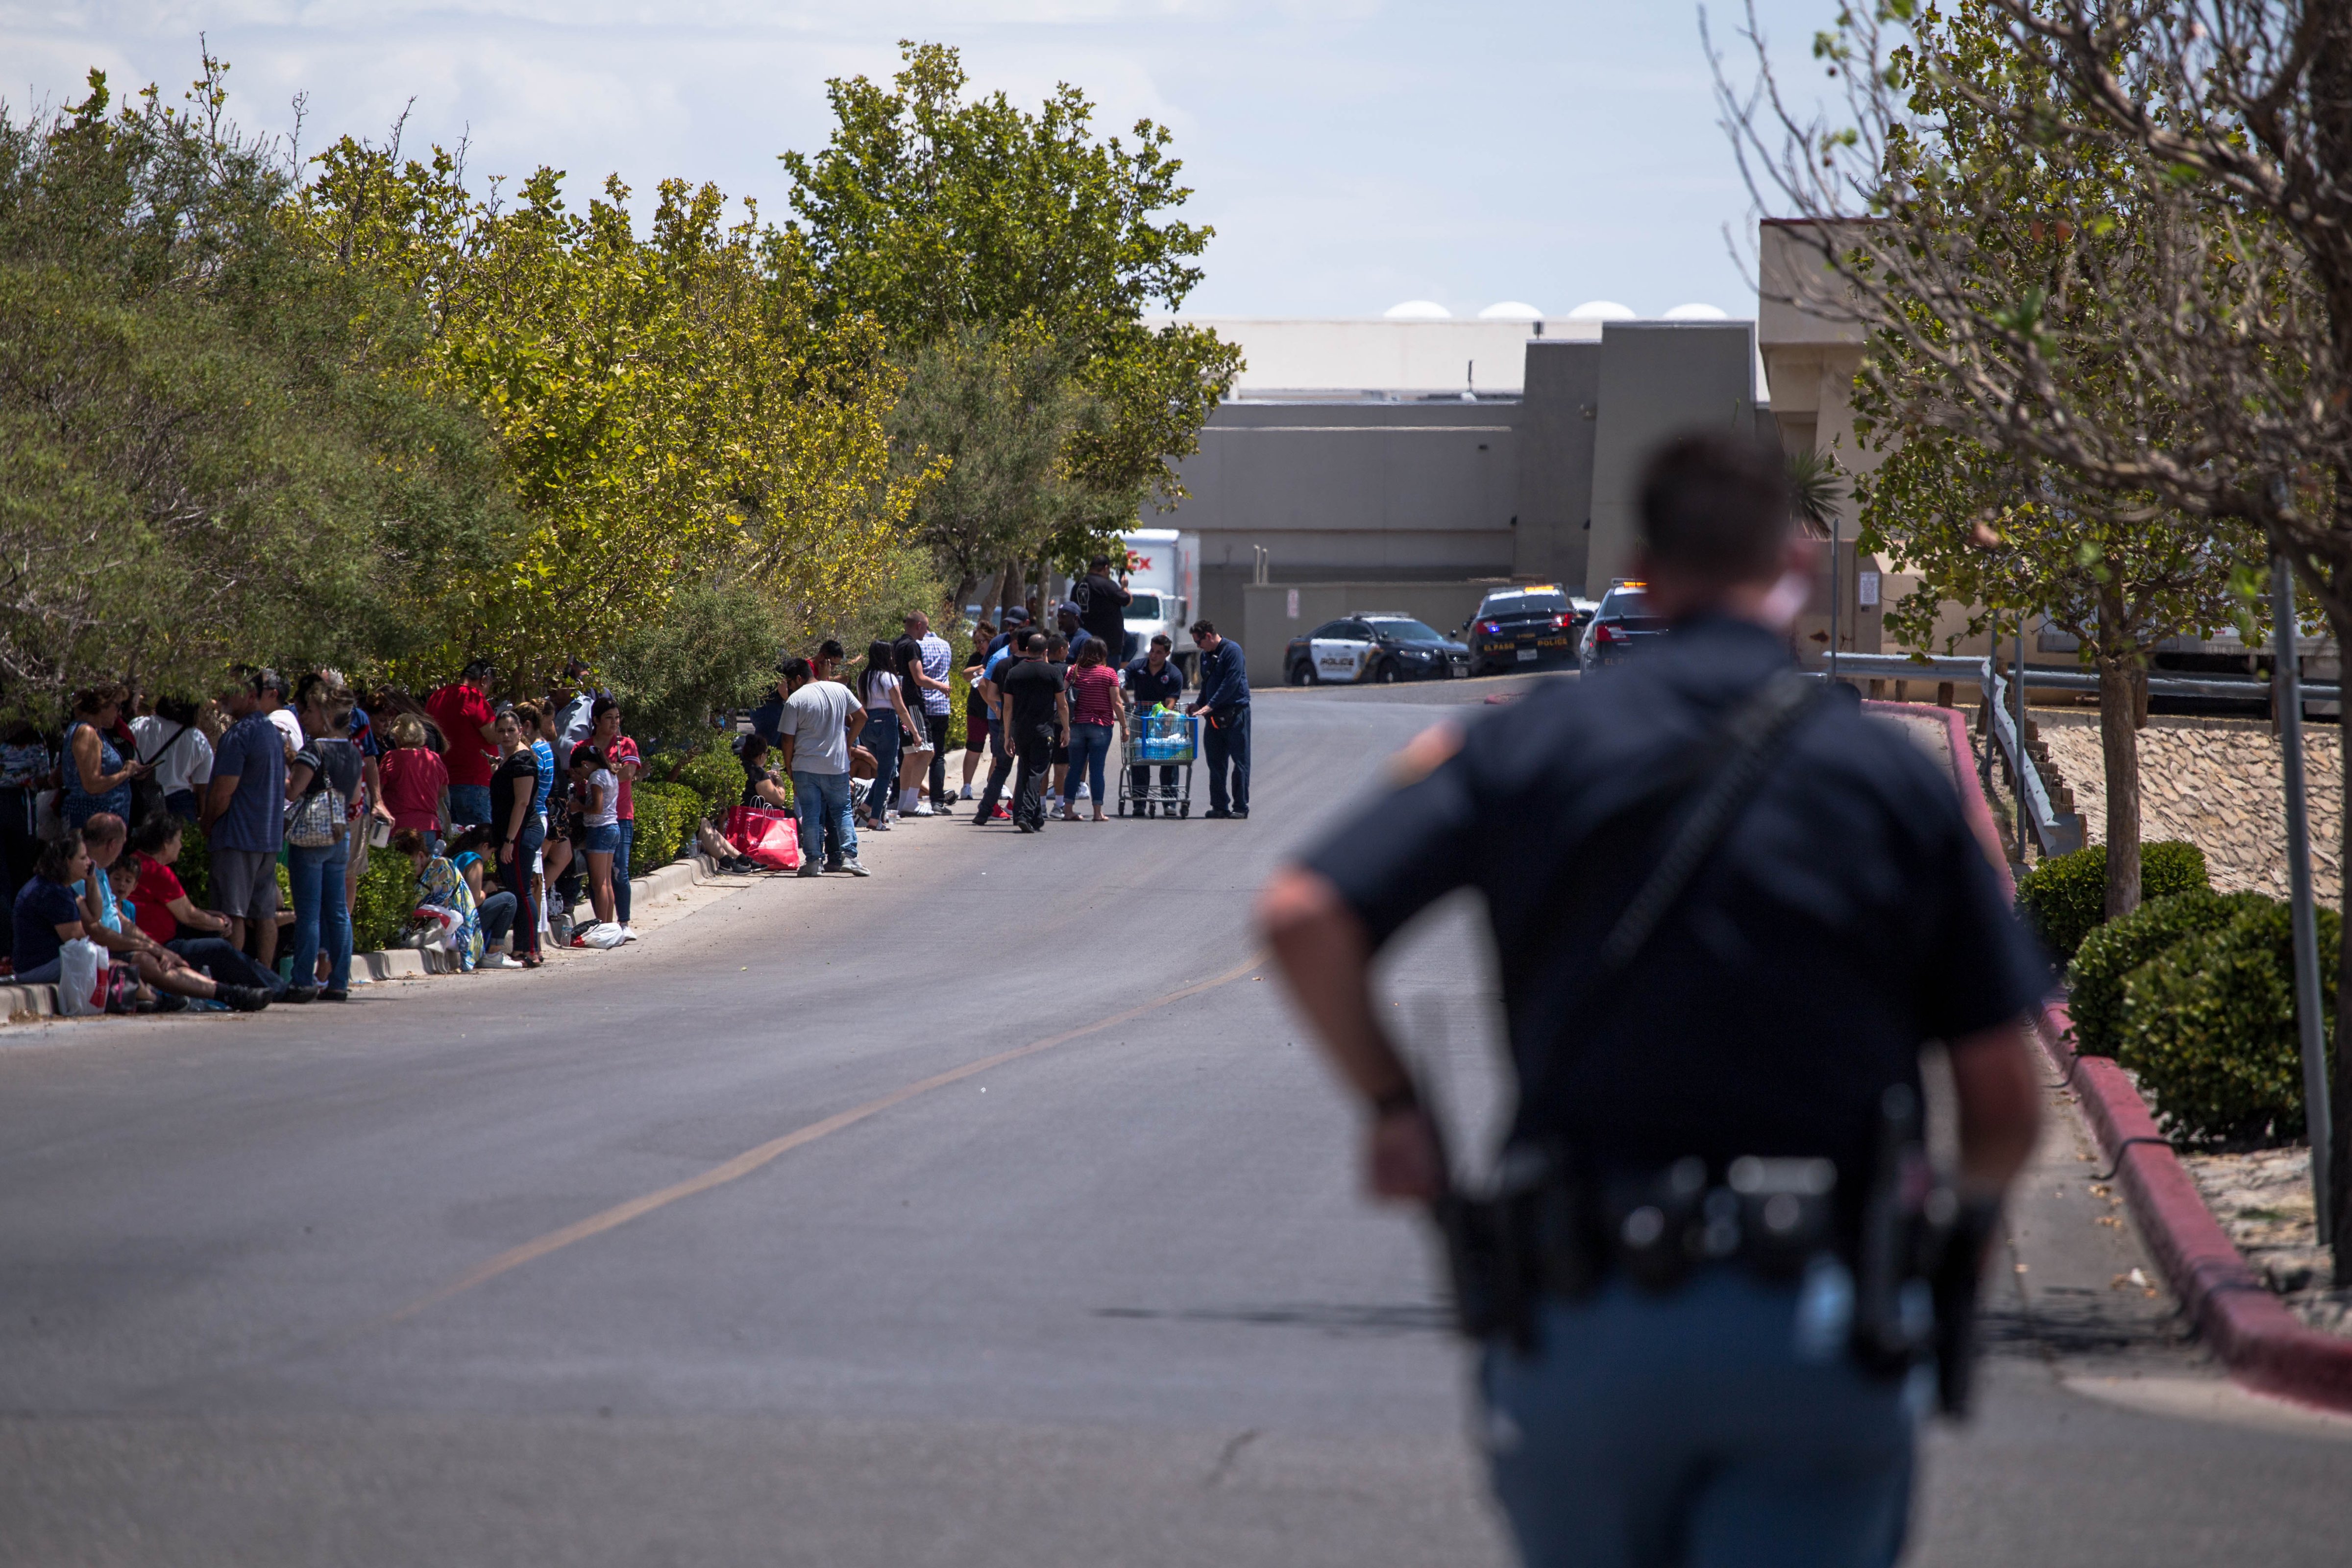 Individuals that were evacuated sit in a parking lot across from a Walmart where a shooting occurred at Cielo Vista Mall in El Paso, Texas, Saturday, Aug. 3, 2019. (JOEL ANGEL JUAREZ—AFP/Getty Images)